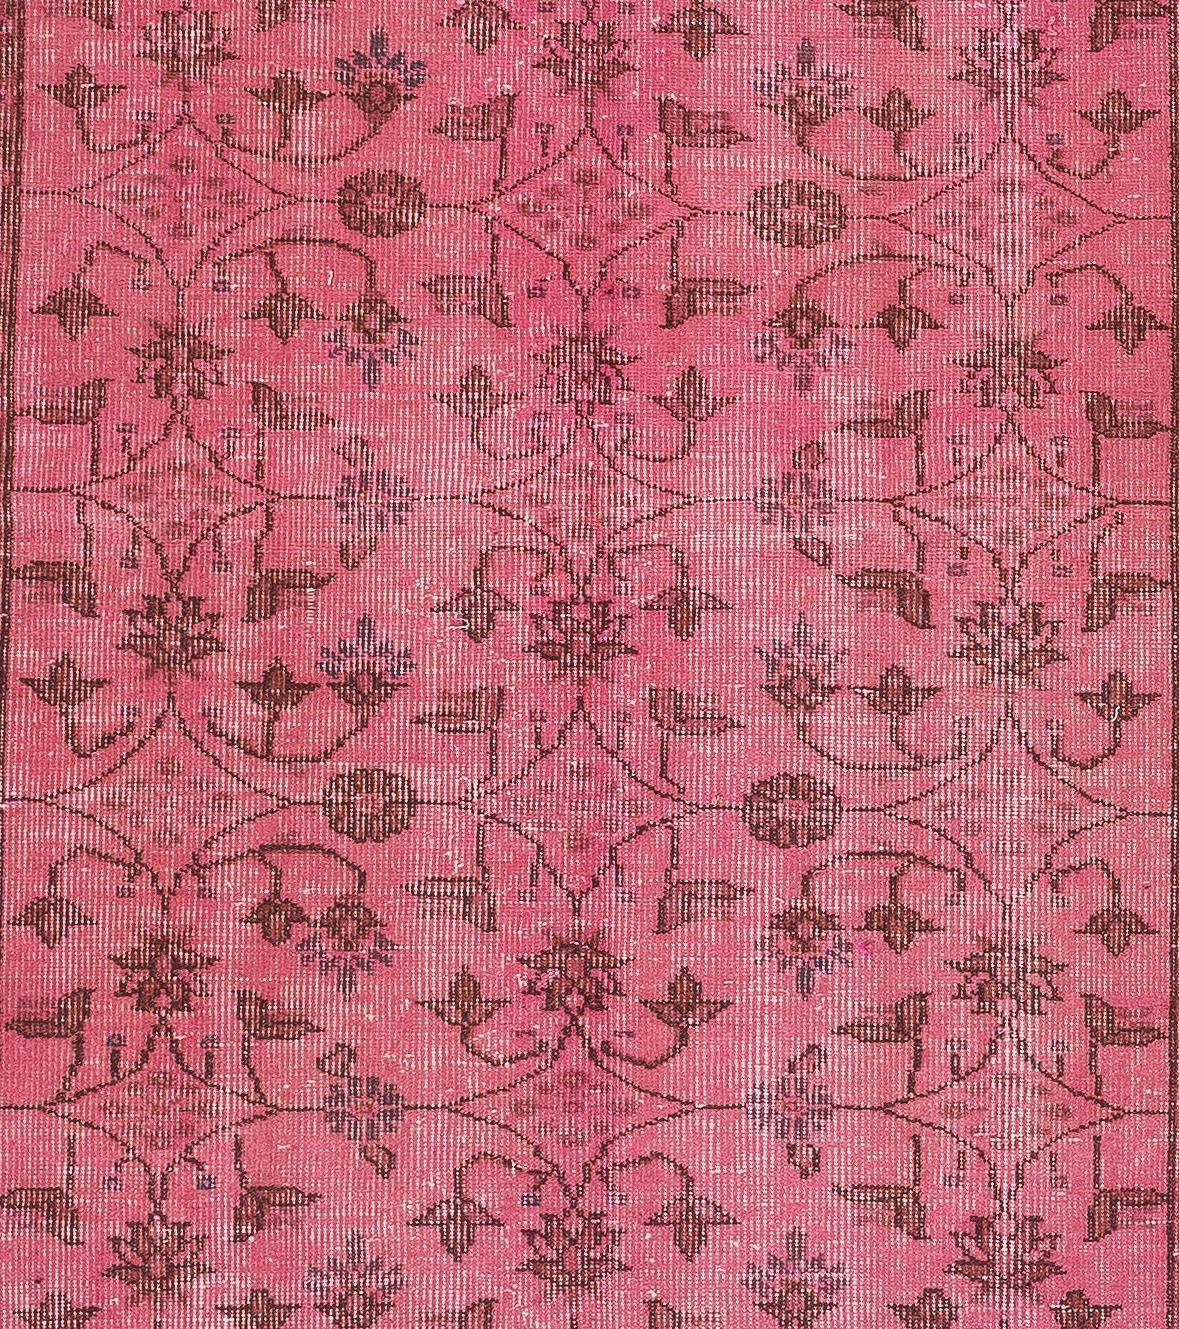 Turkish Vintage Handmade Anatolian Accent Rug with Floral Design Redyed in Pink